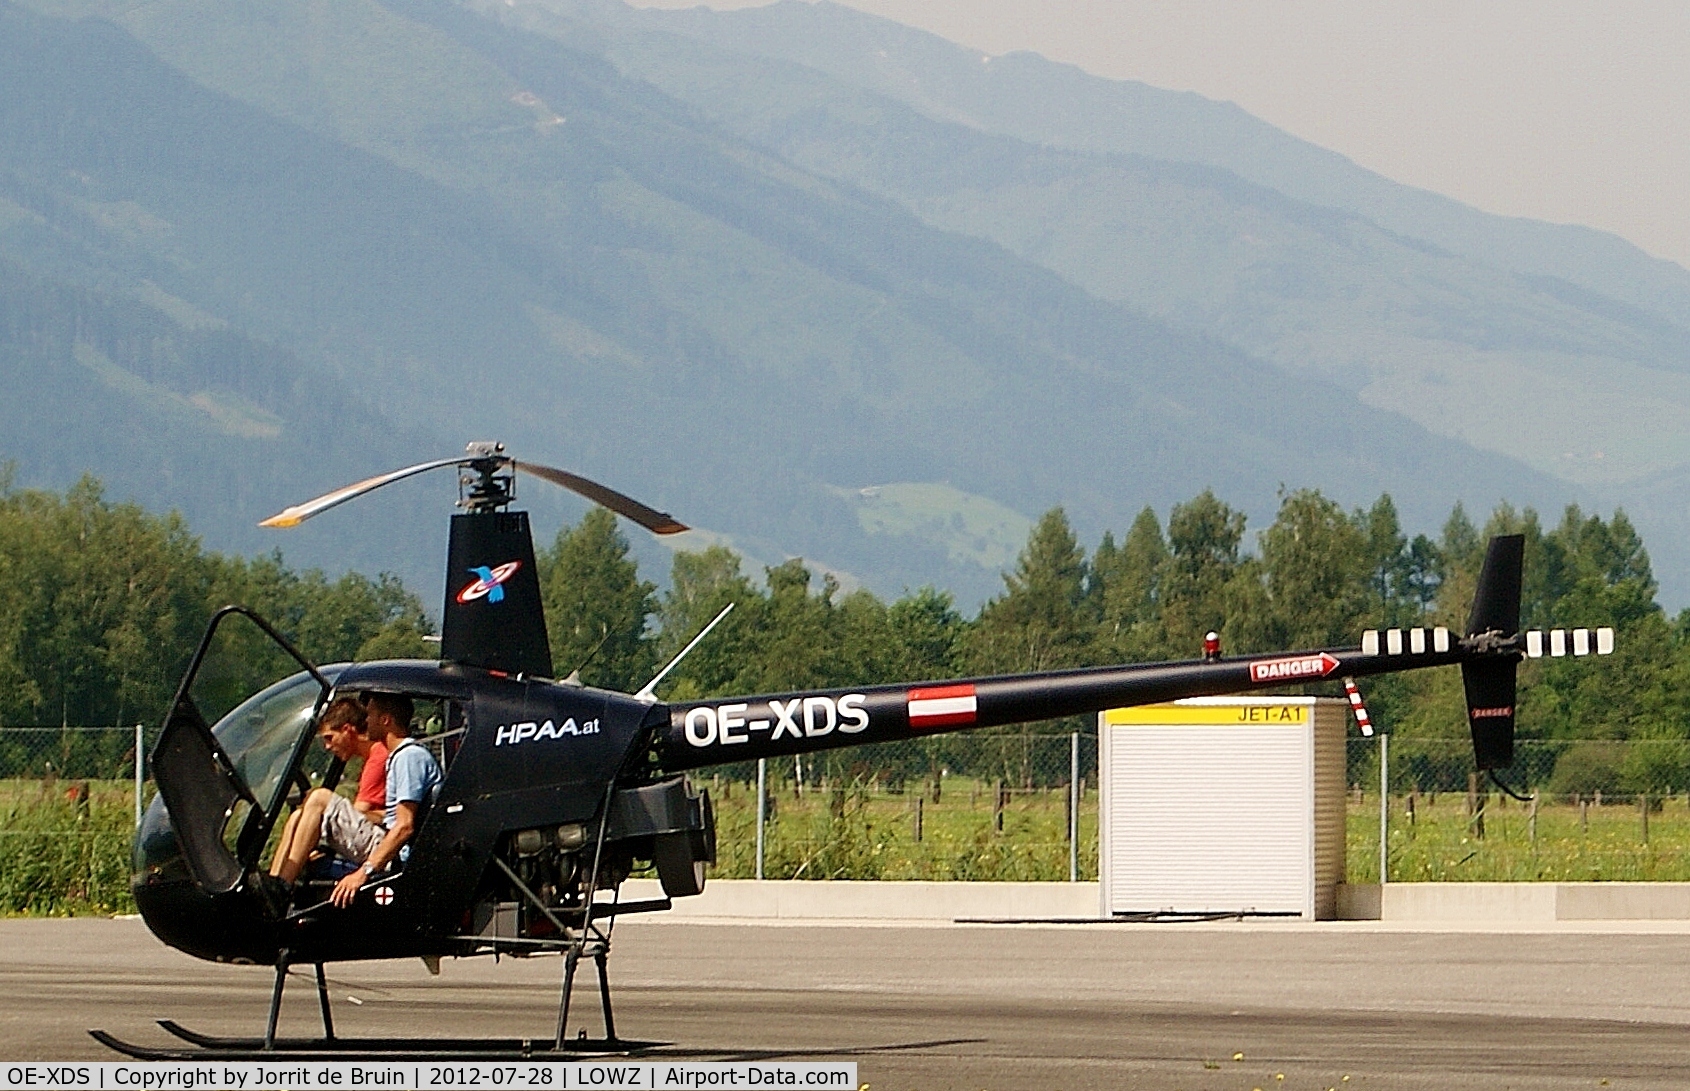 OE-XDS, Robinson R22 Beta C/N 3322, A black Robinson was just landed at the Heli-apron, nearby the stationed Alpin Heli 6. The pilots just paid money to the aiport office for the perfect landing, when they continued their flight.